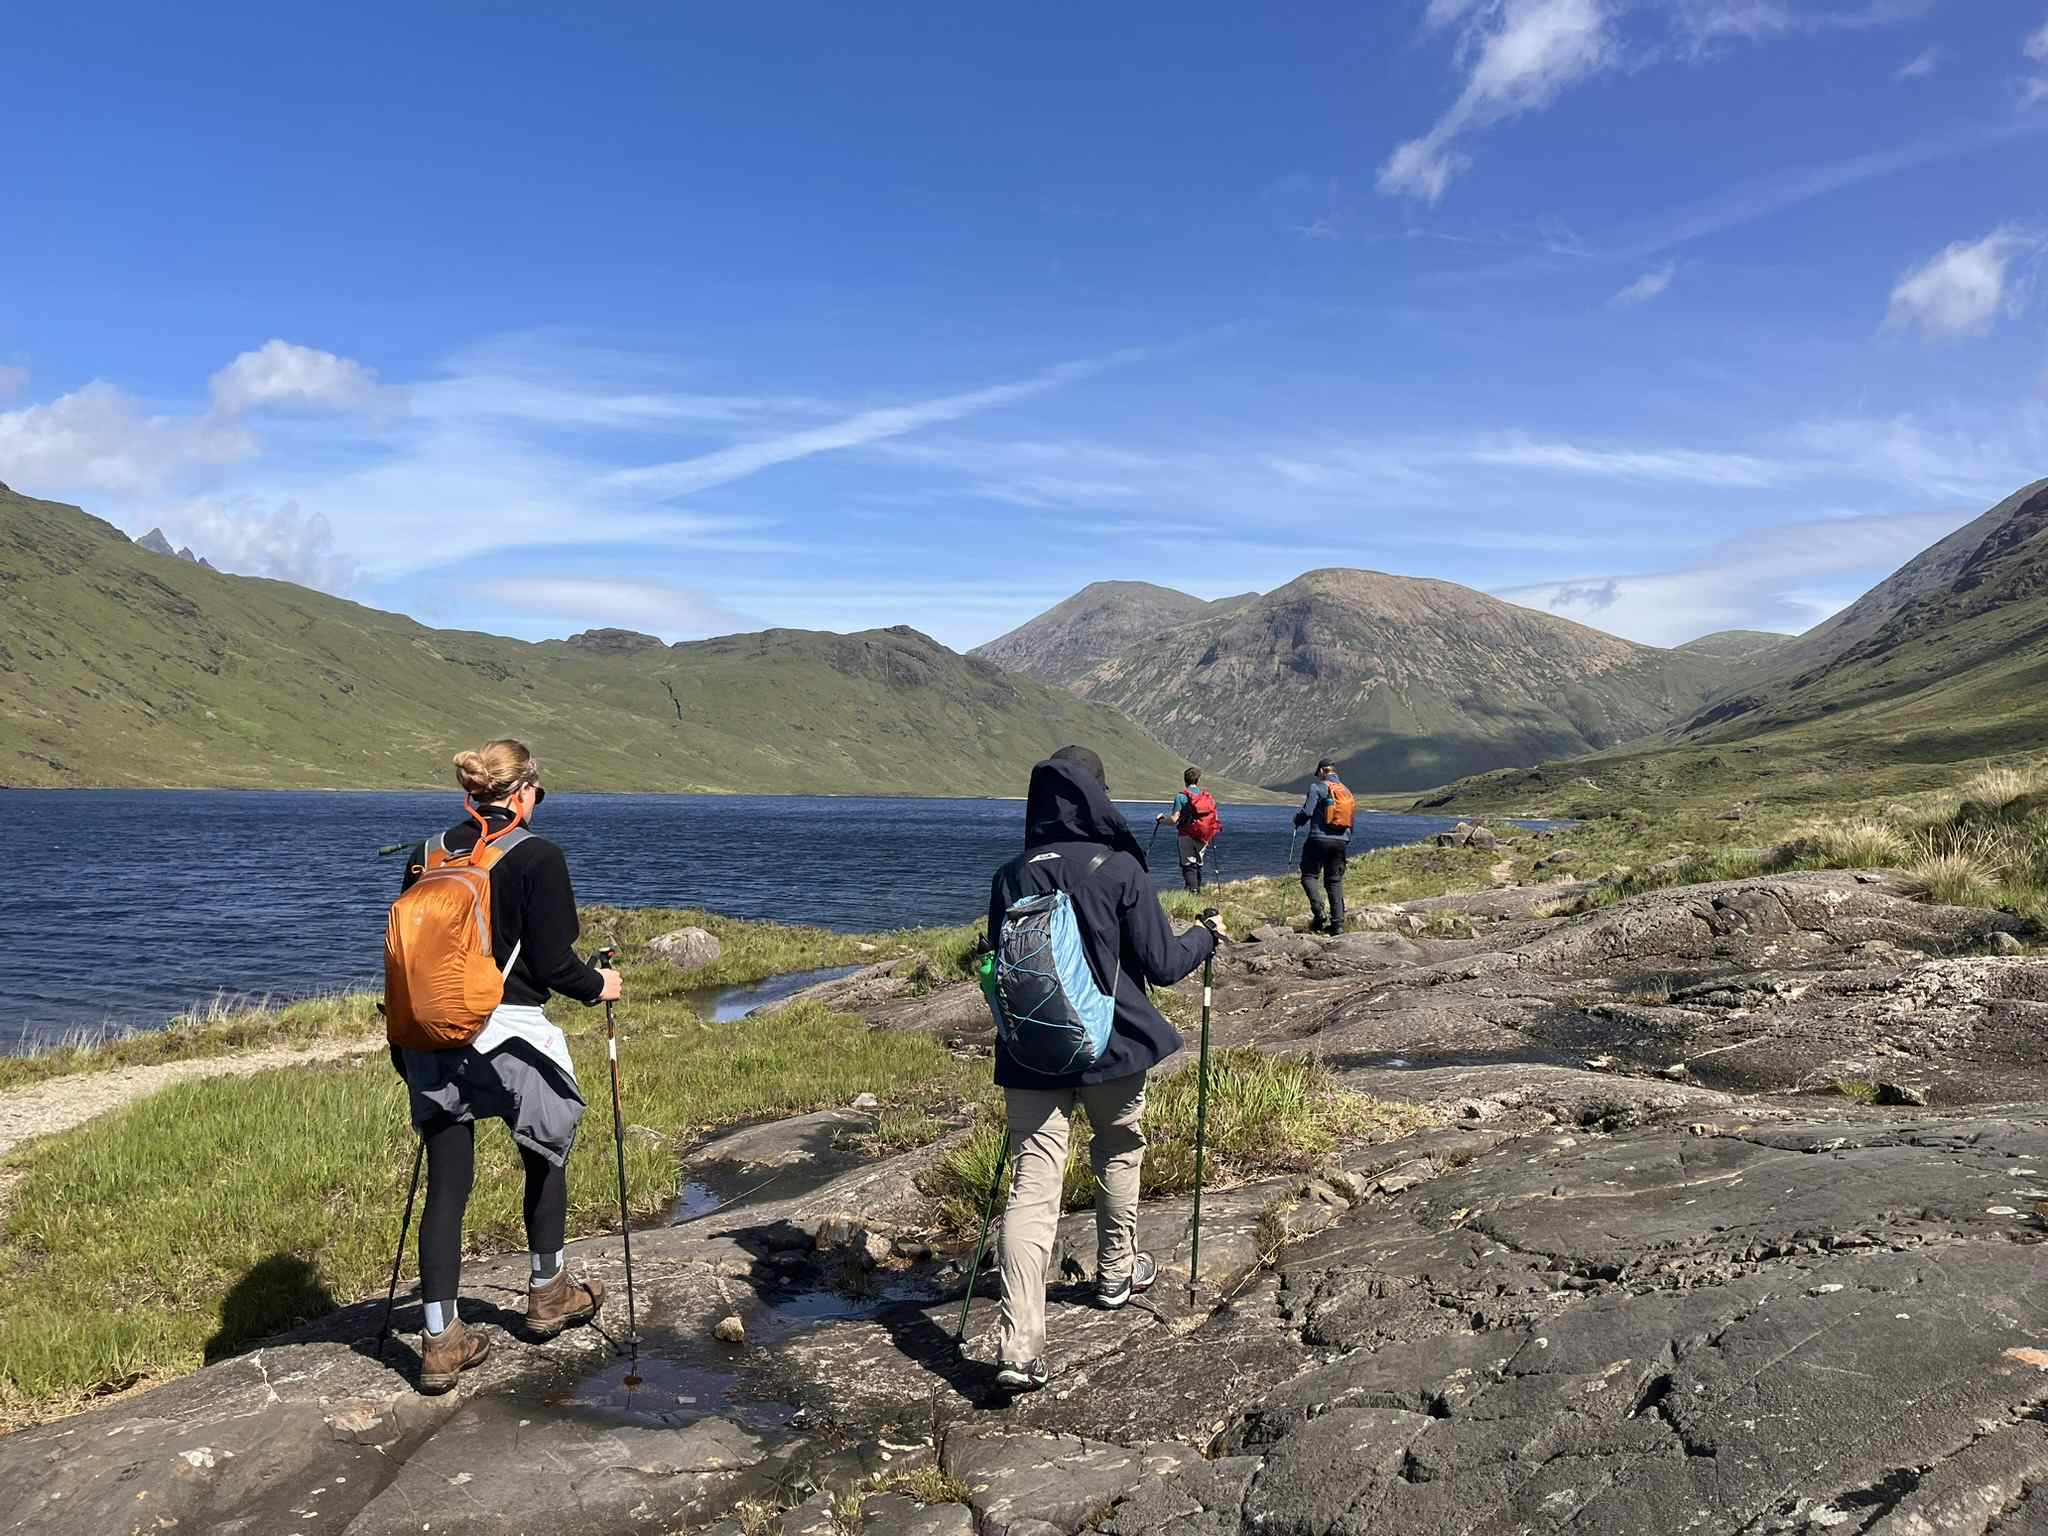 Hikers on the Isle of Skye by a loch on a sunny day, Scotland